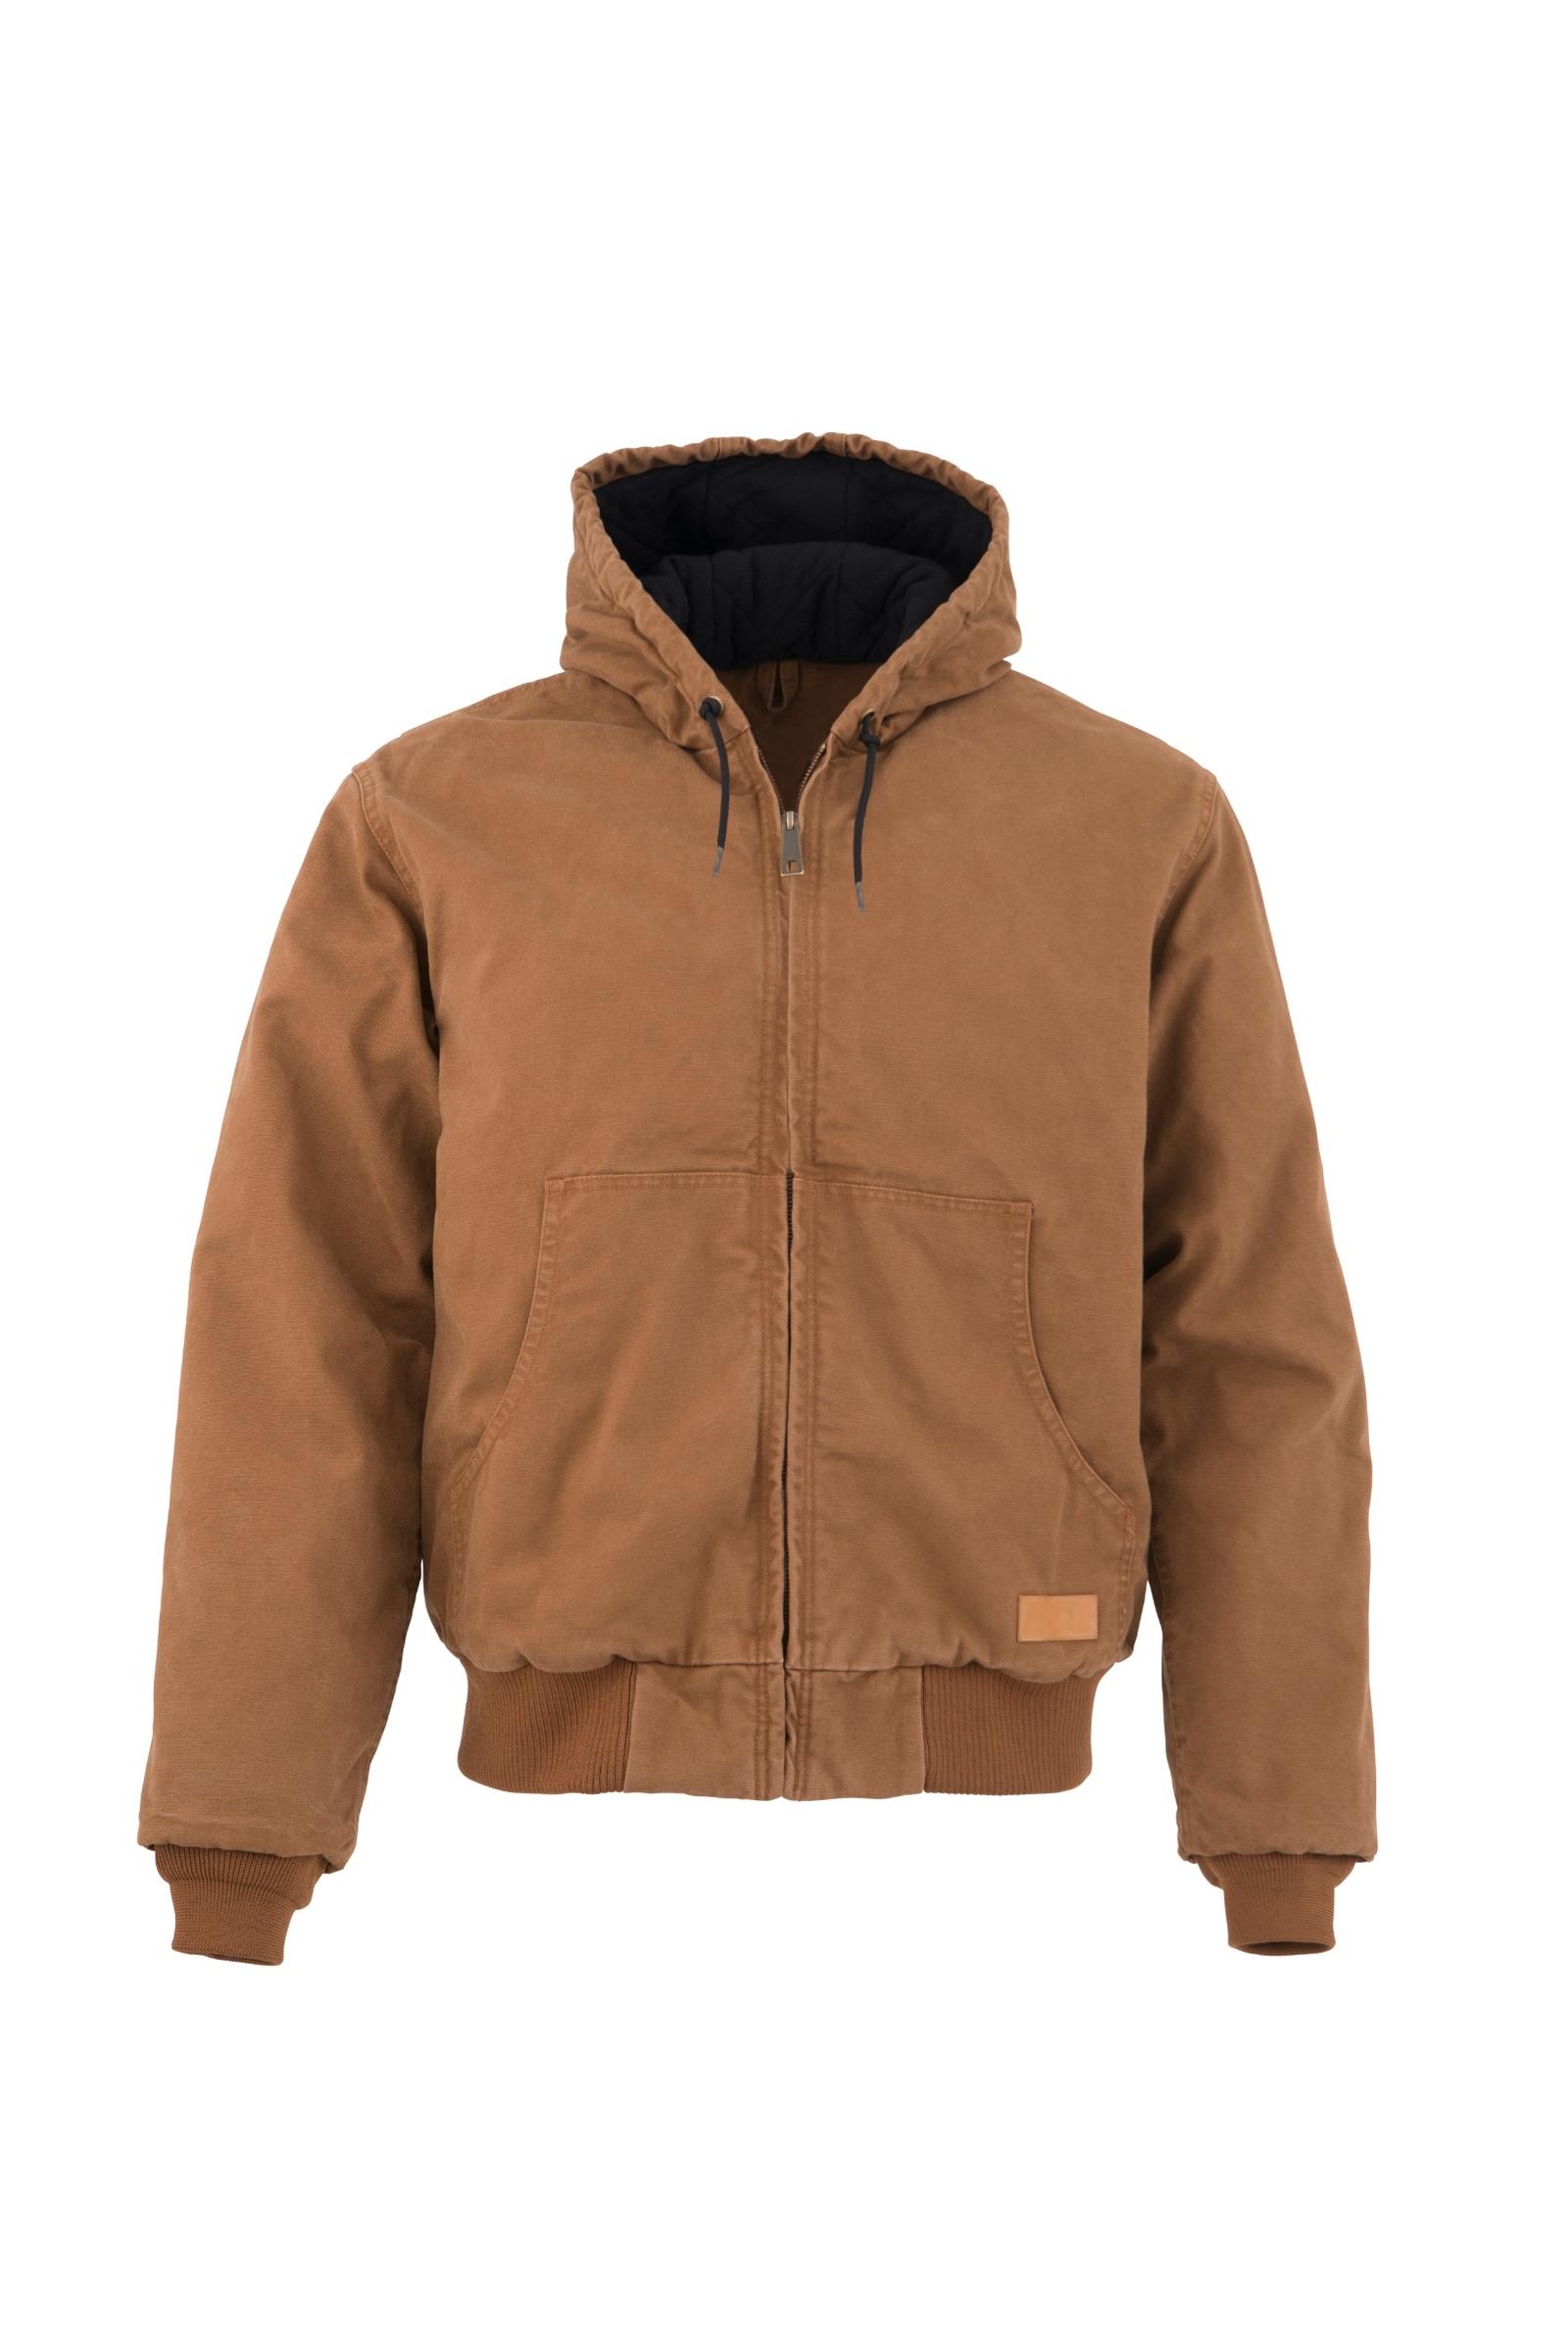 Noble Outfitters Men's Canvas Hooded Jacket